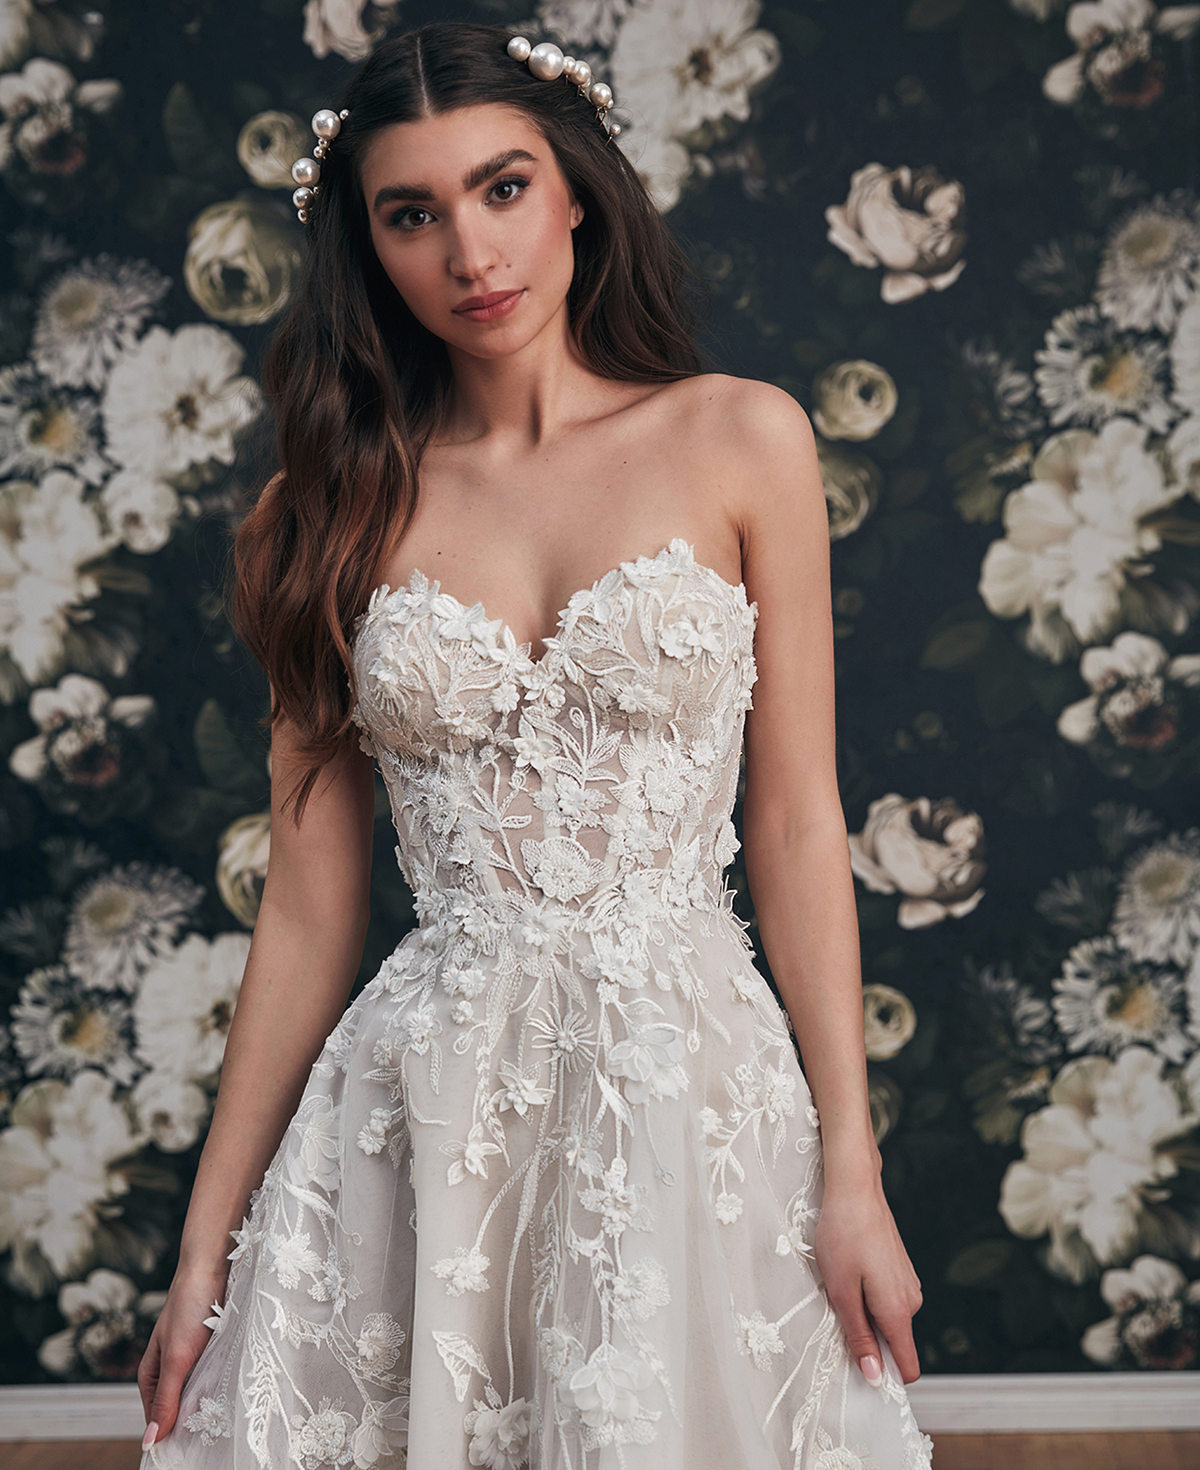 3D Lace Off the Shoulder Wedding Dress with Pockets and A Line Silhouette